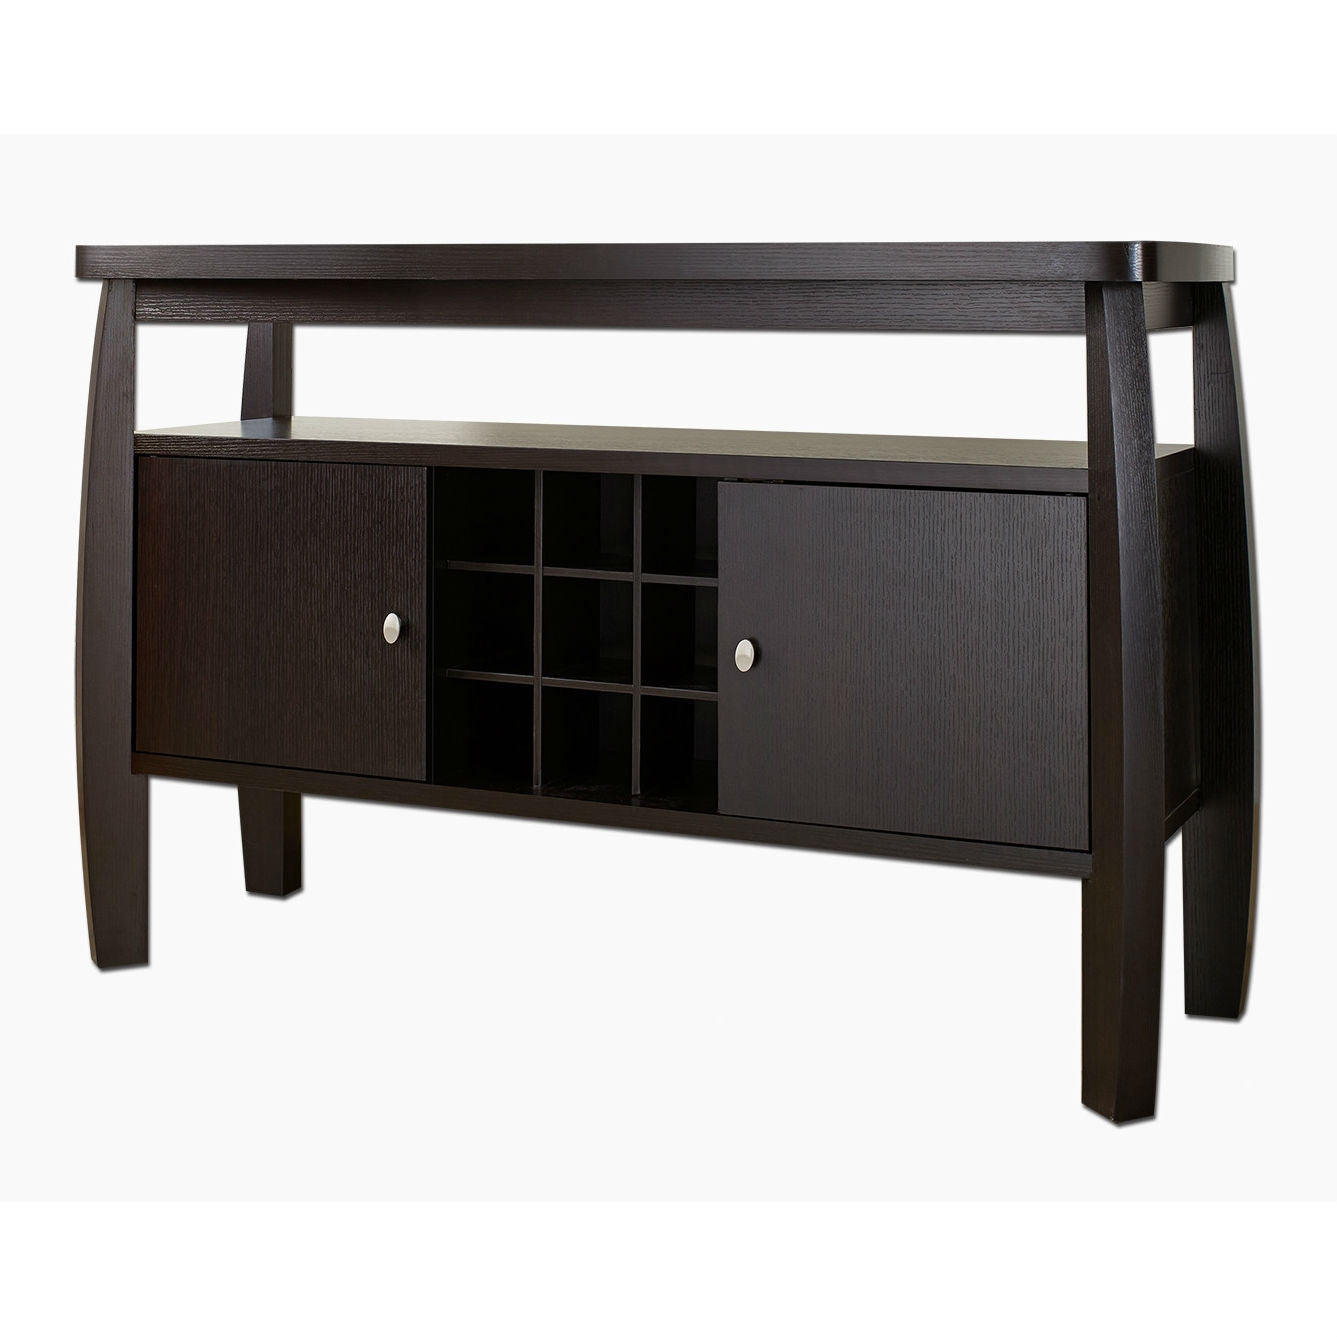 Dining > Sideboards & Buffets - Modern Dining Room Sideboard Buffet Server Console Table